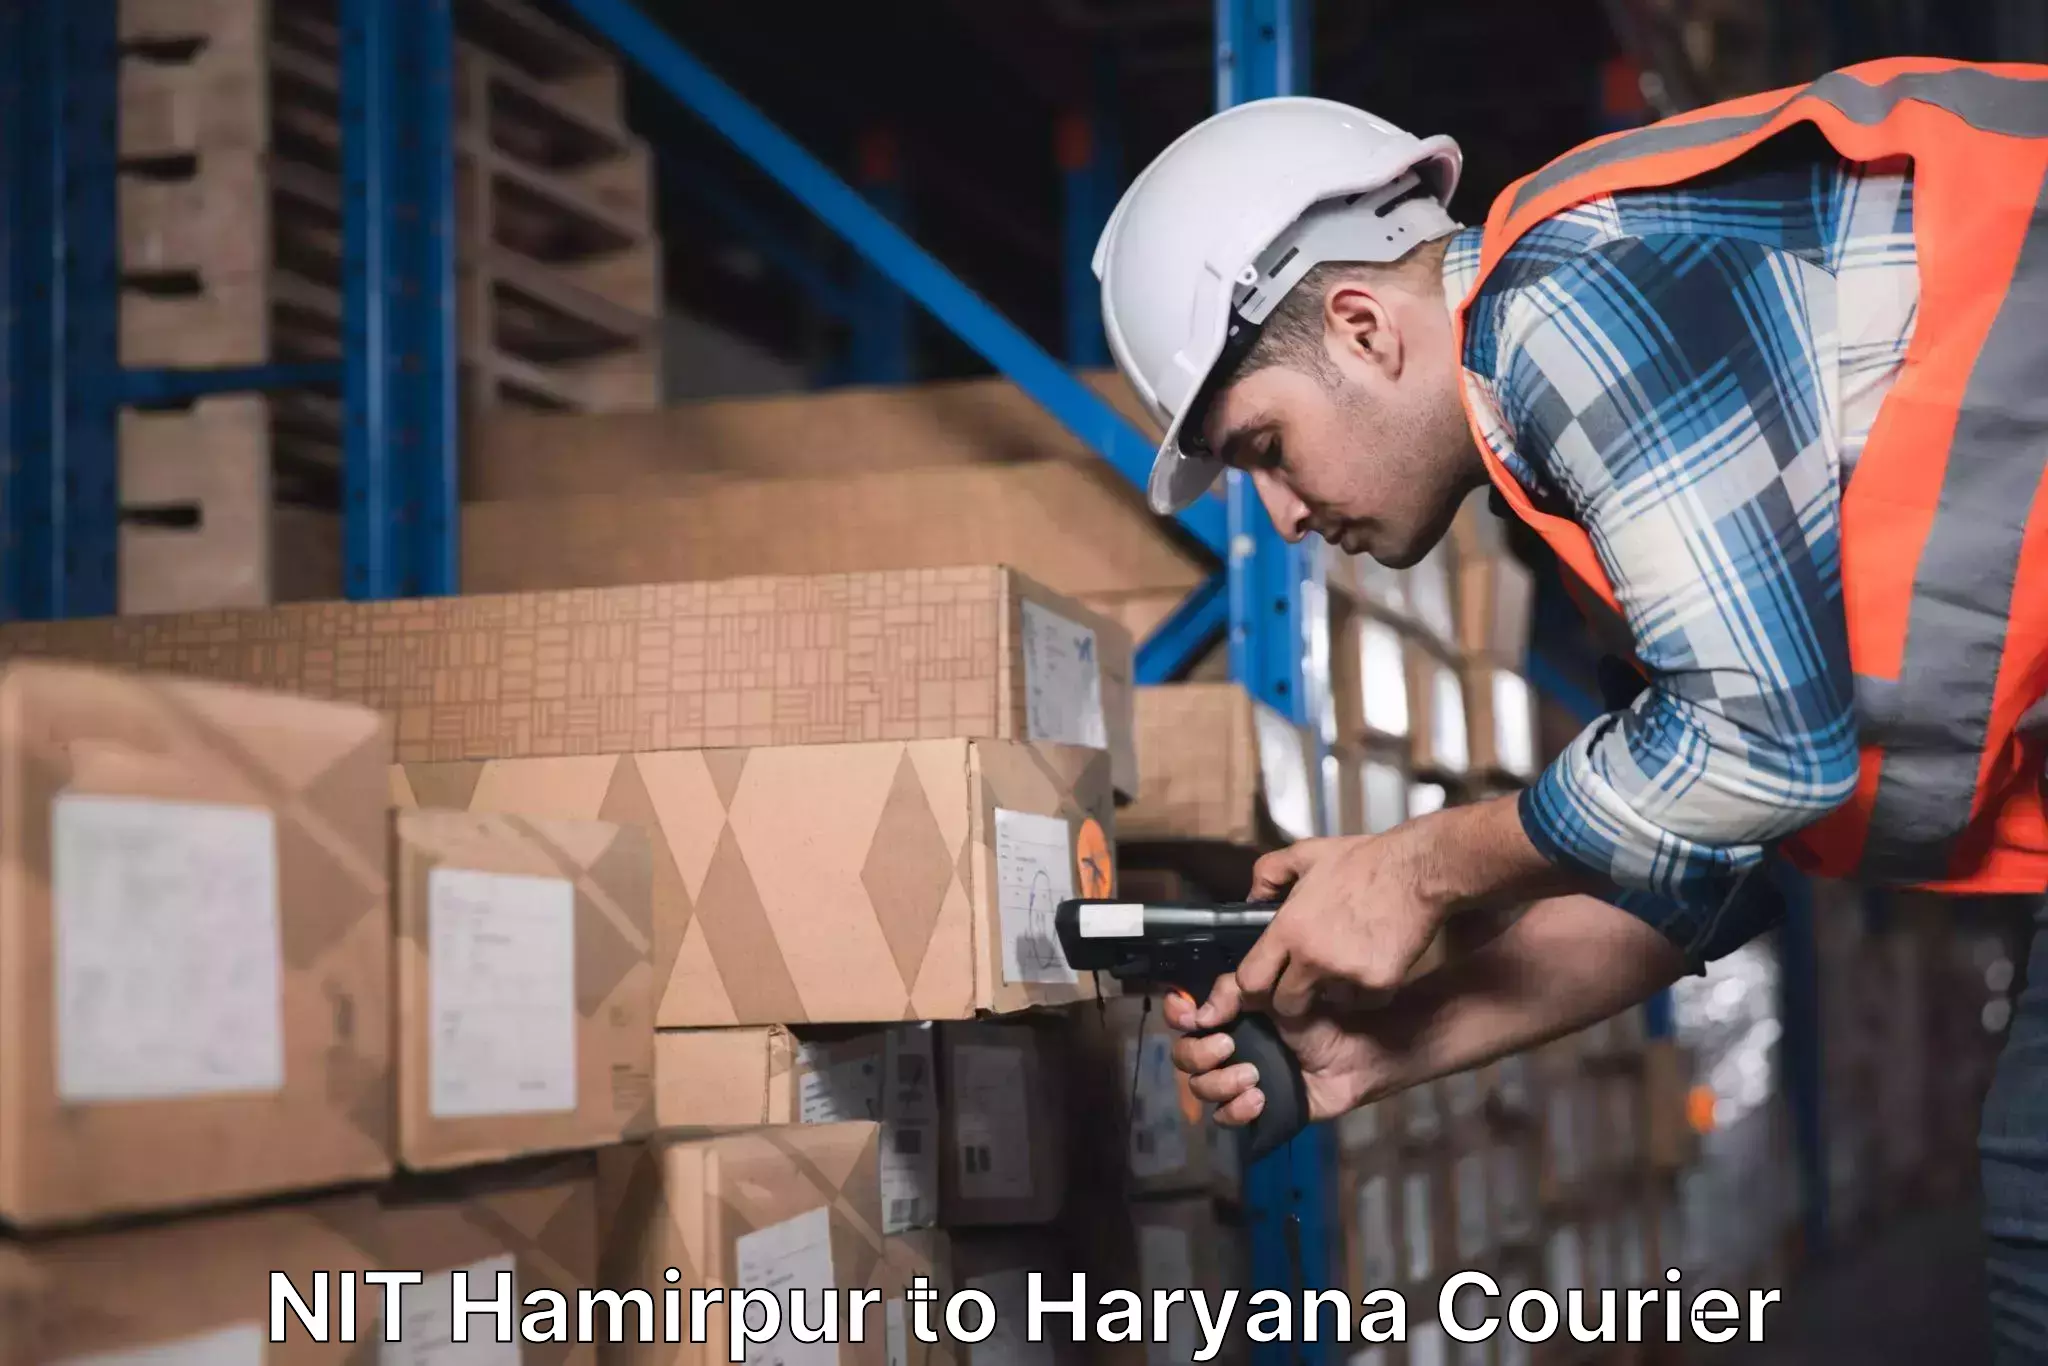 Cargo delivery service NIT Hamirpur to Panchkula